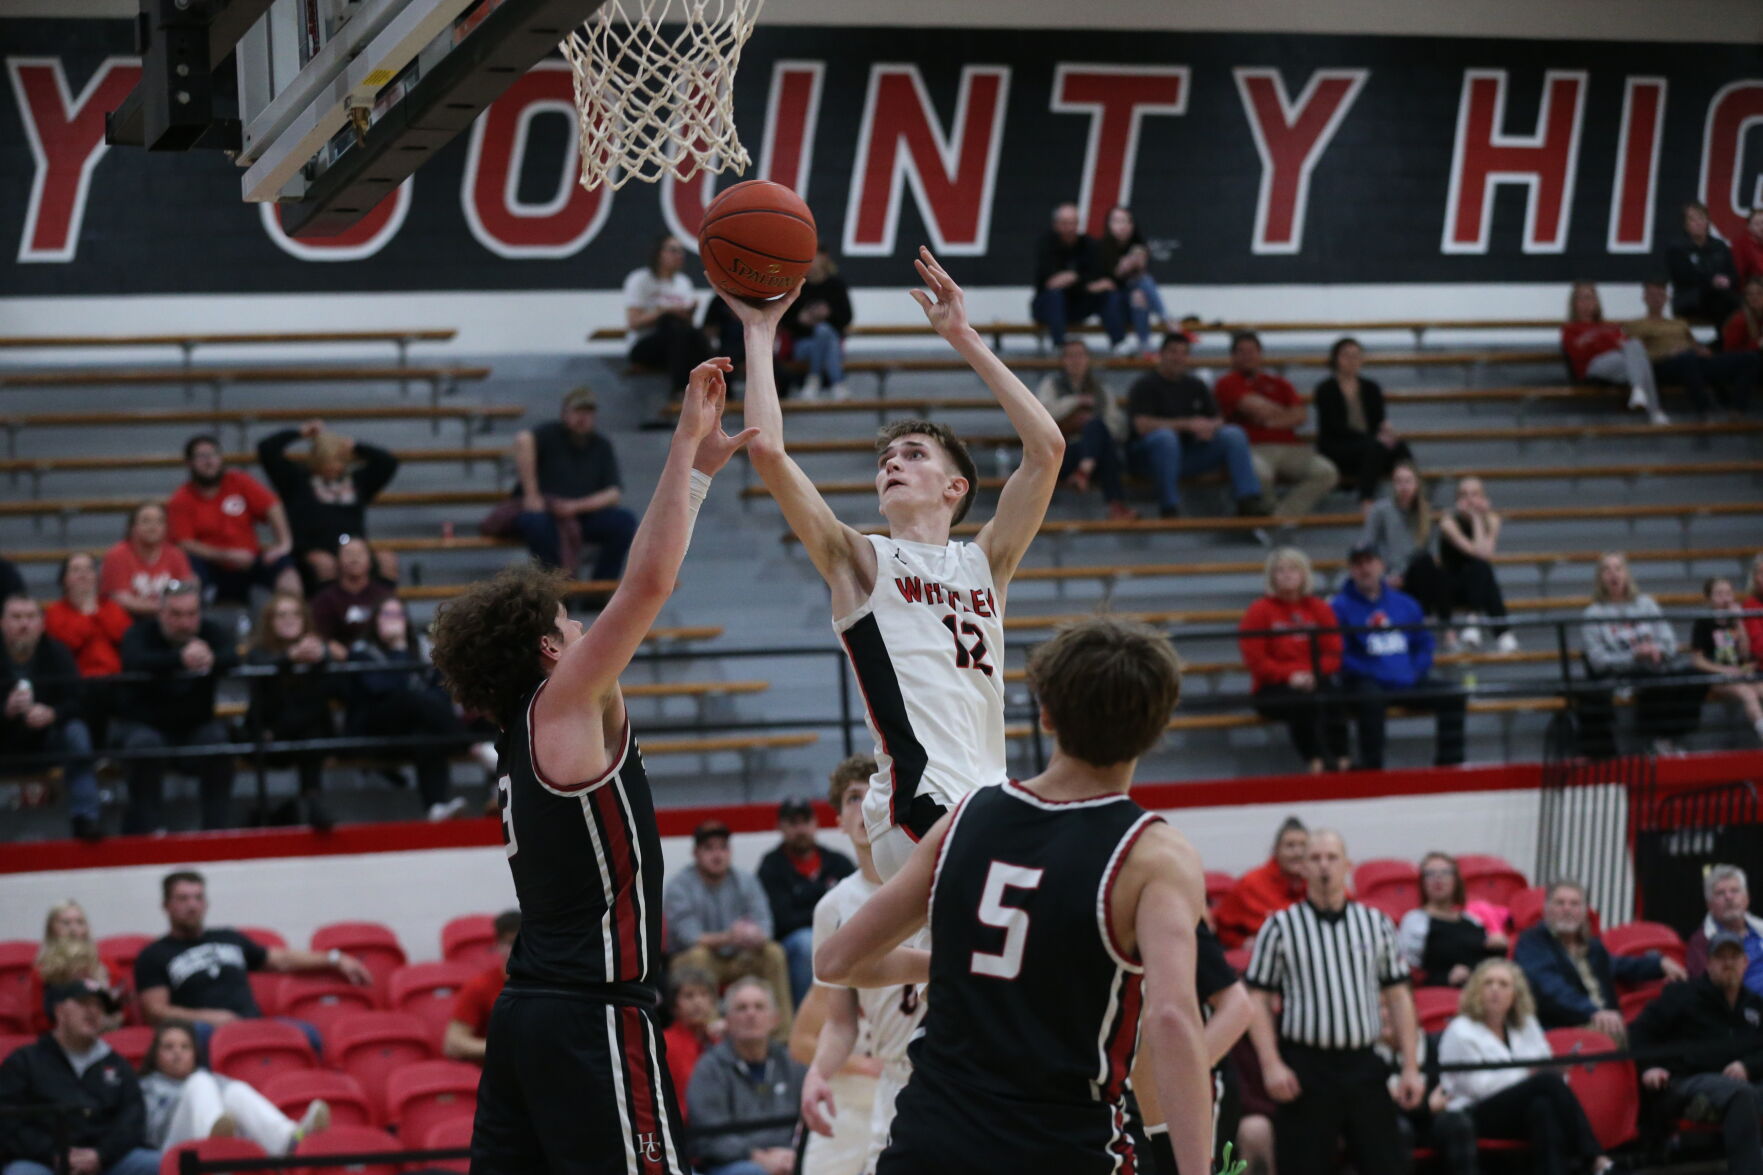 Harlan County Shines in Victory Over Whitley County as Trent Noah Scores 34 Points